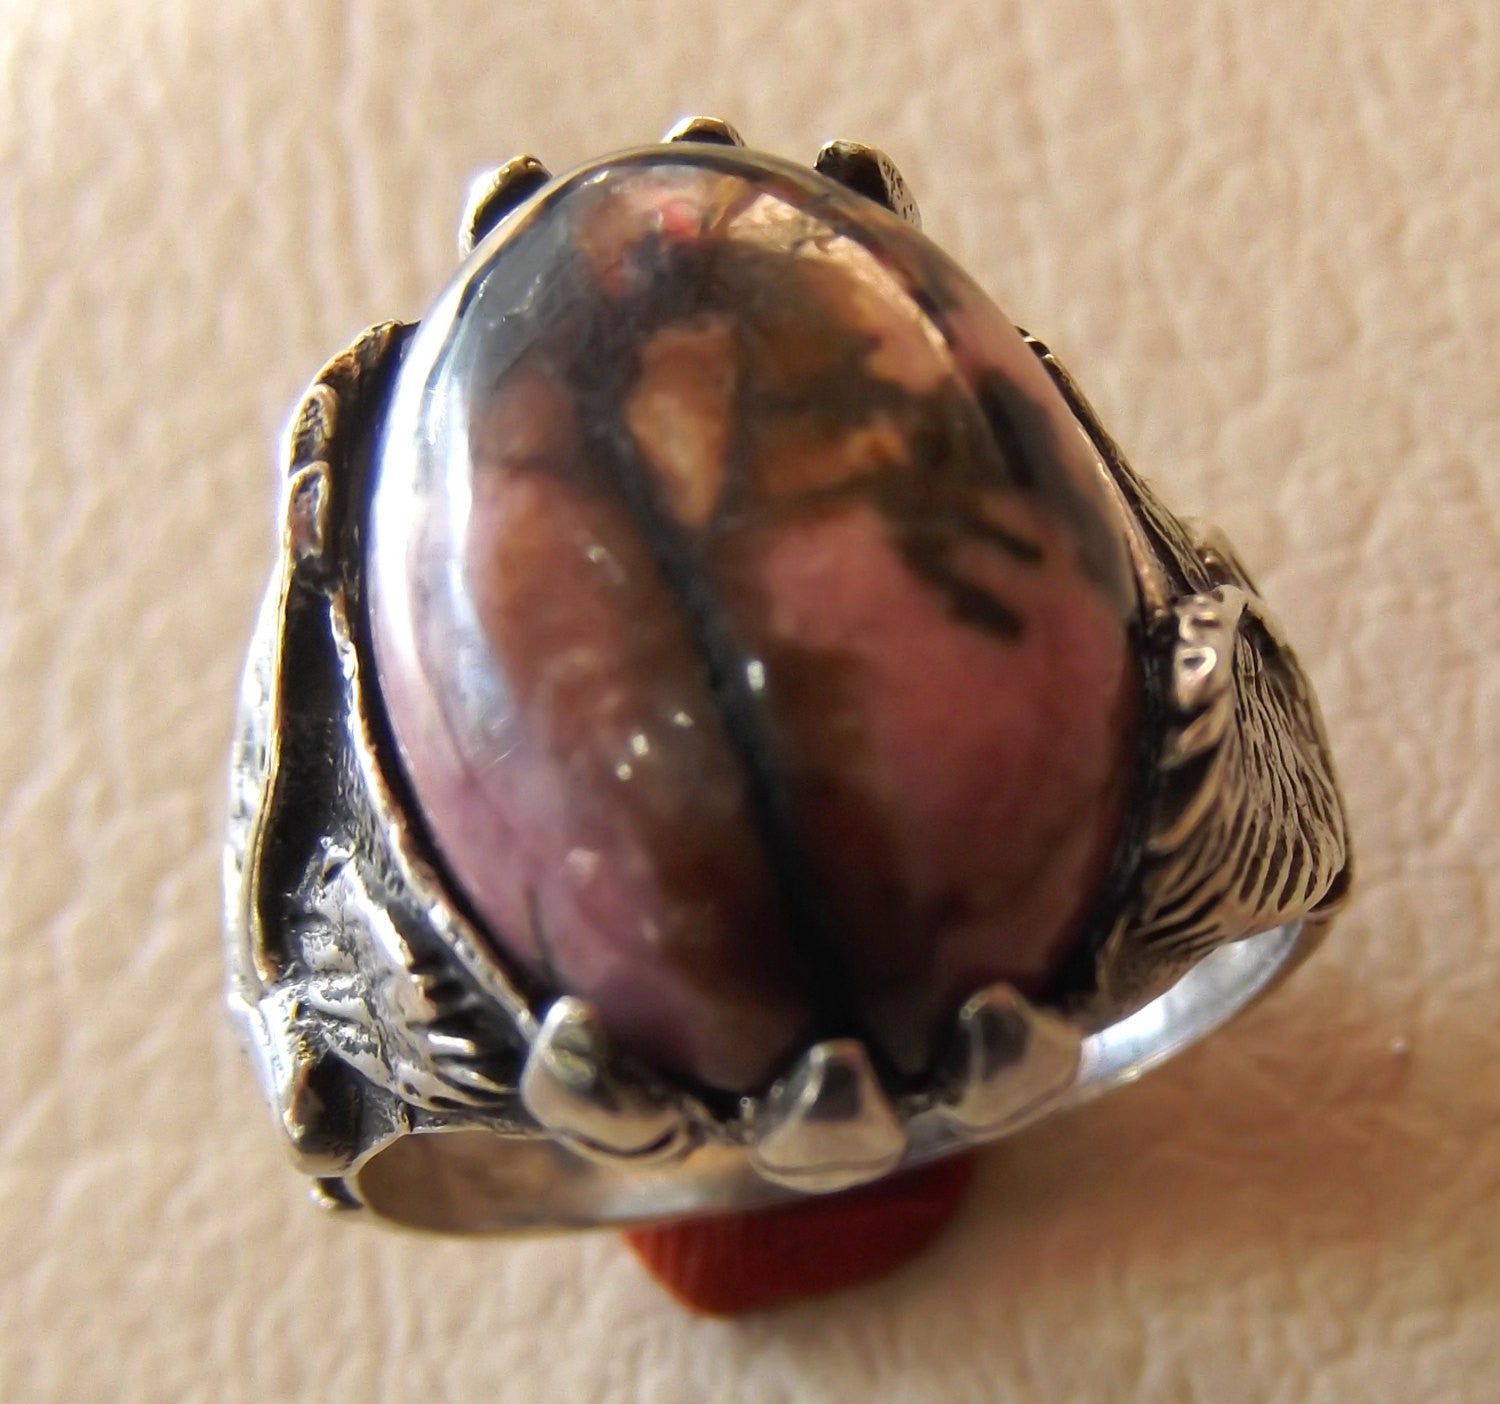 eagle men ring rhodonite jasper oval sterling silver 925 natural stone semi precious pink and black gem all sizes fast shipping jewelry